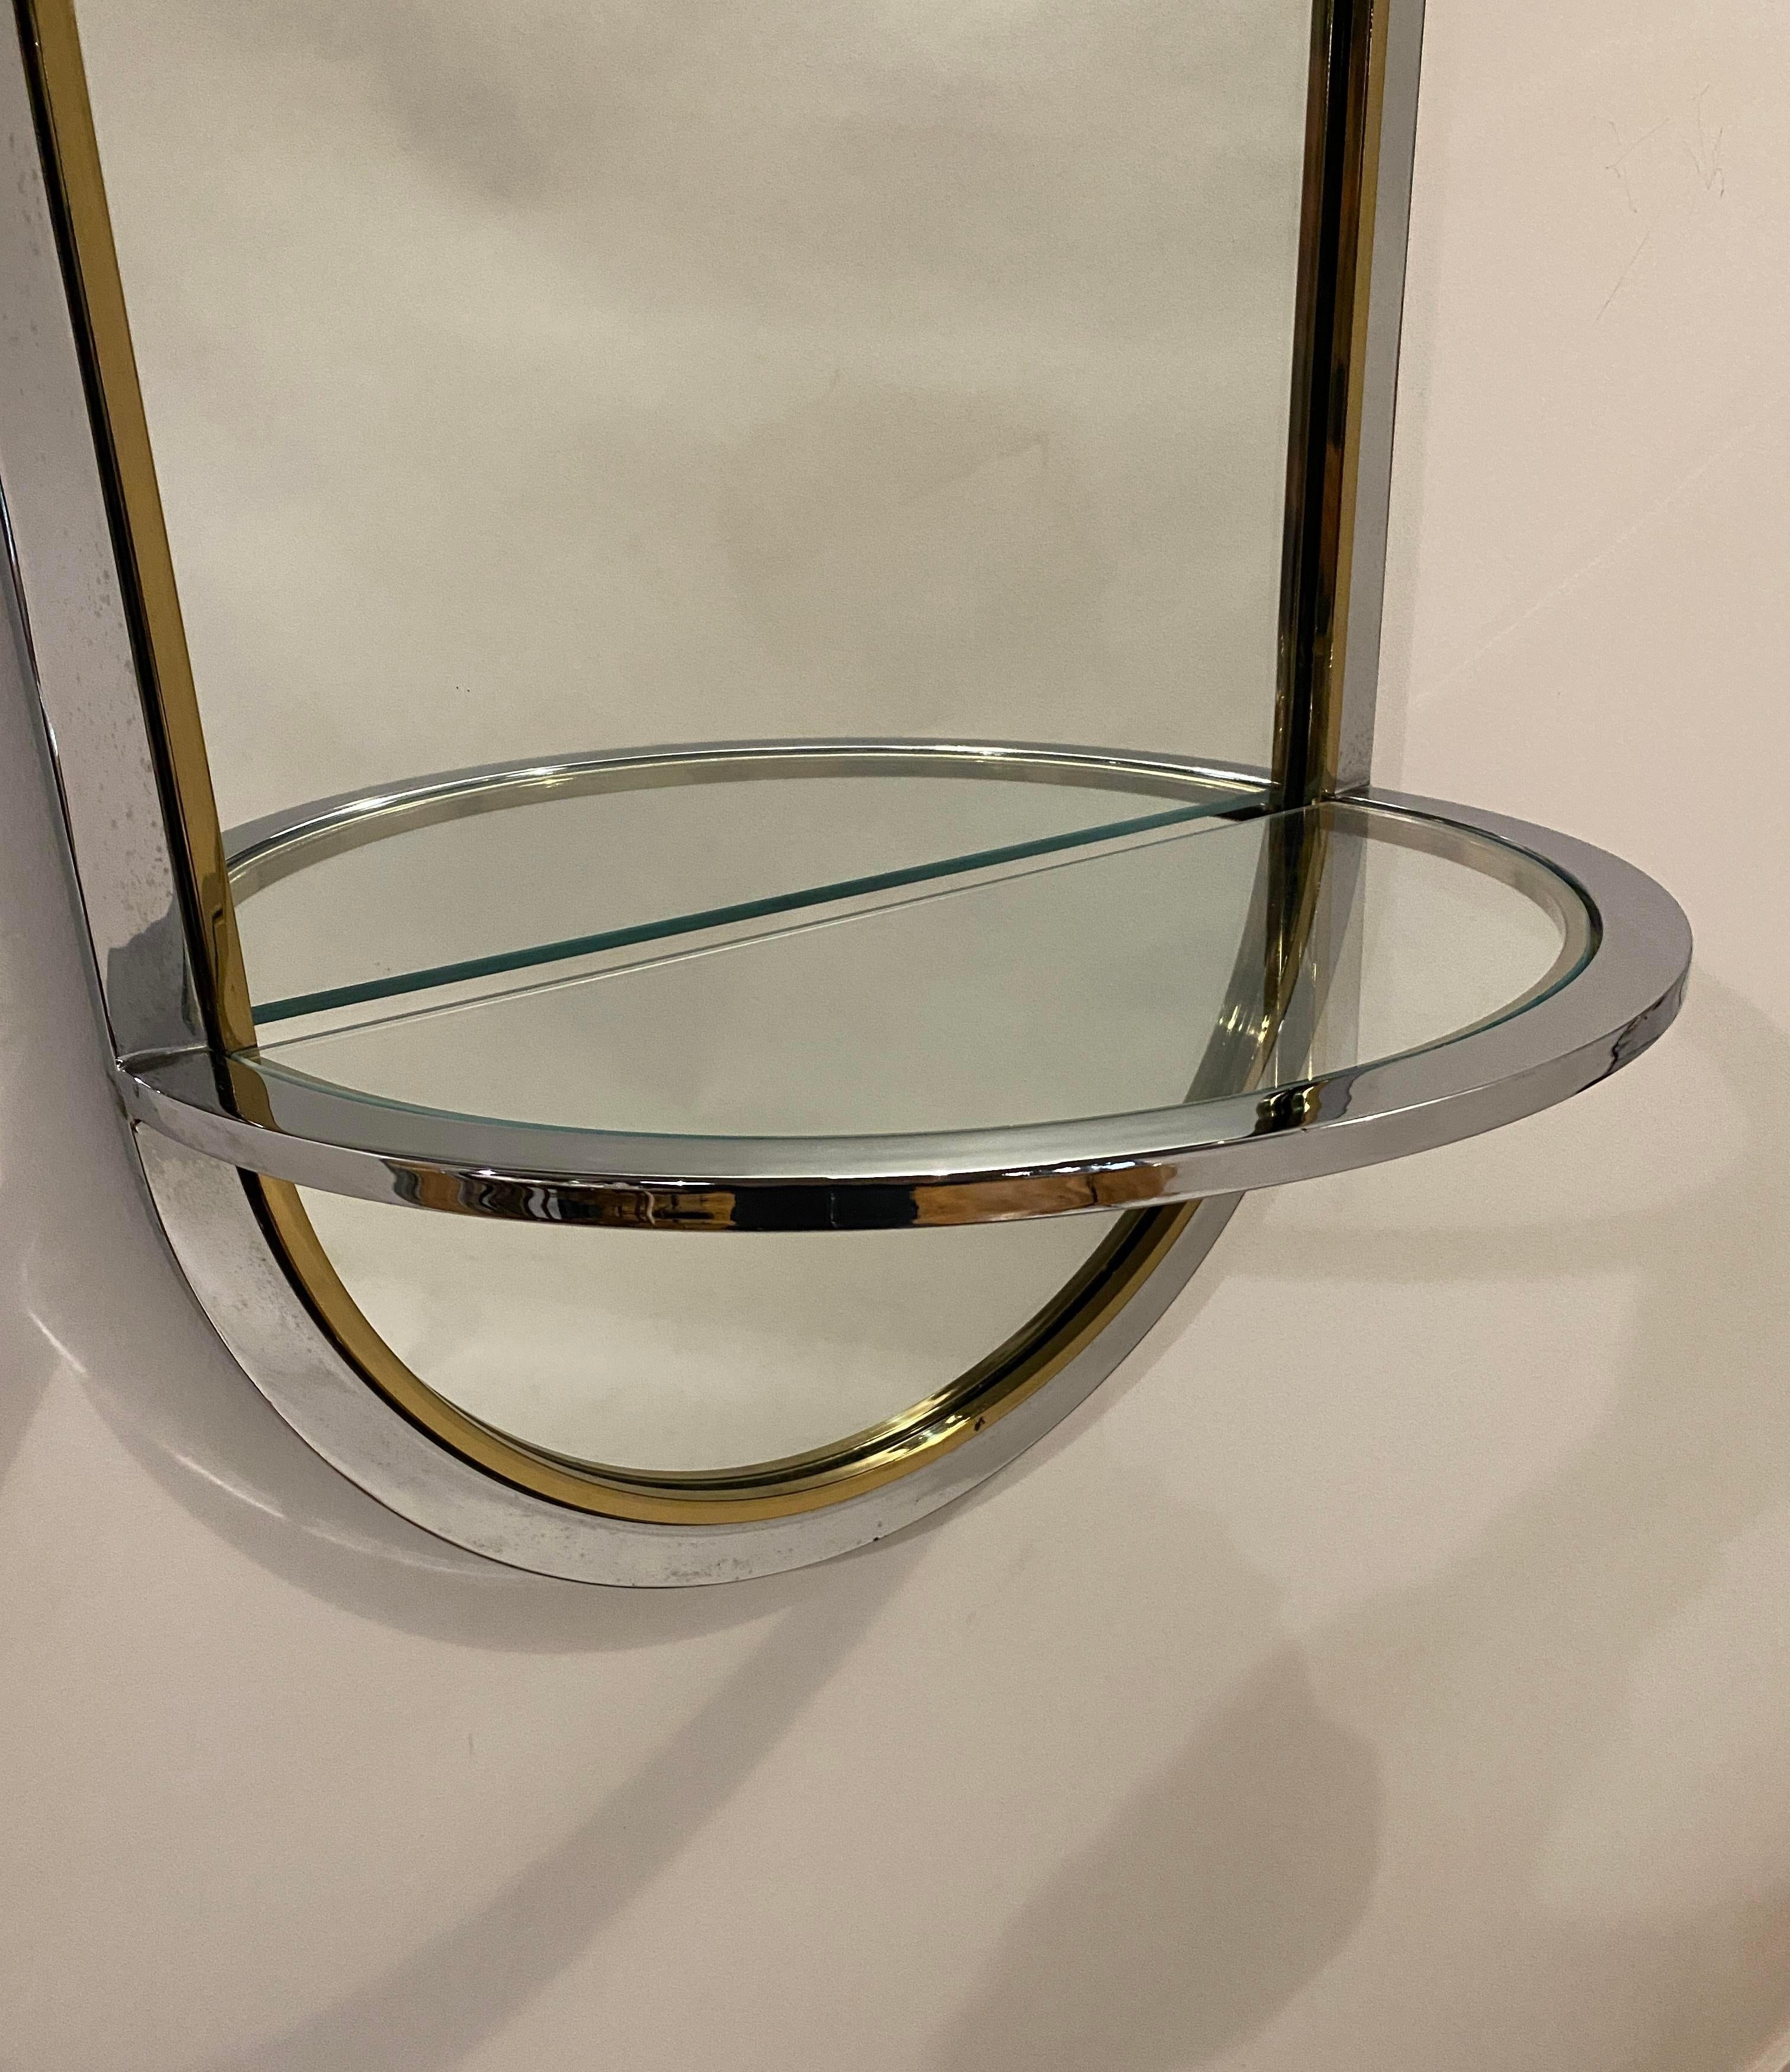 Polished Leon Rosen Racetrack Wall Mirror for Pace, 1970's For Sale